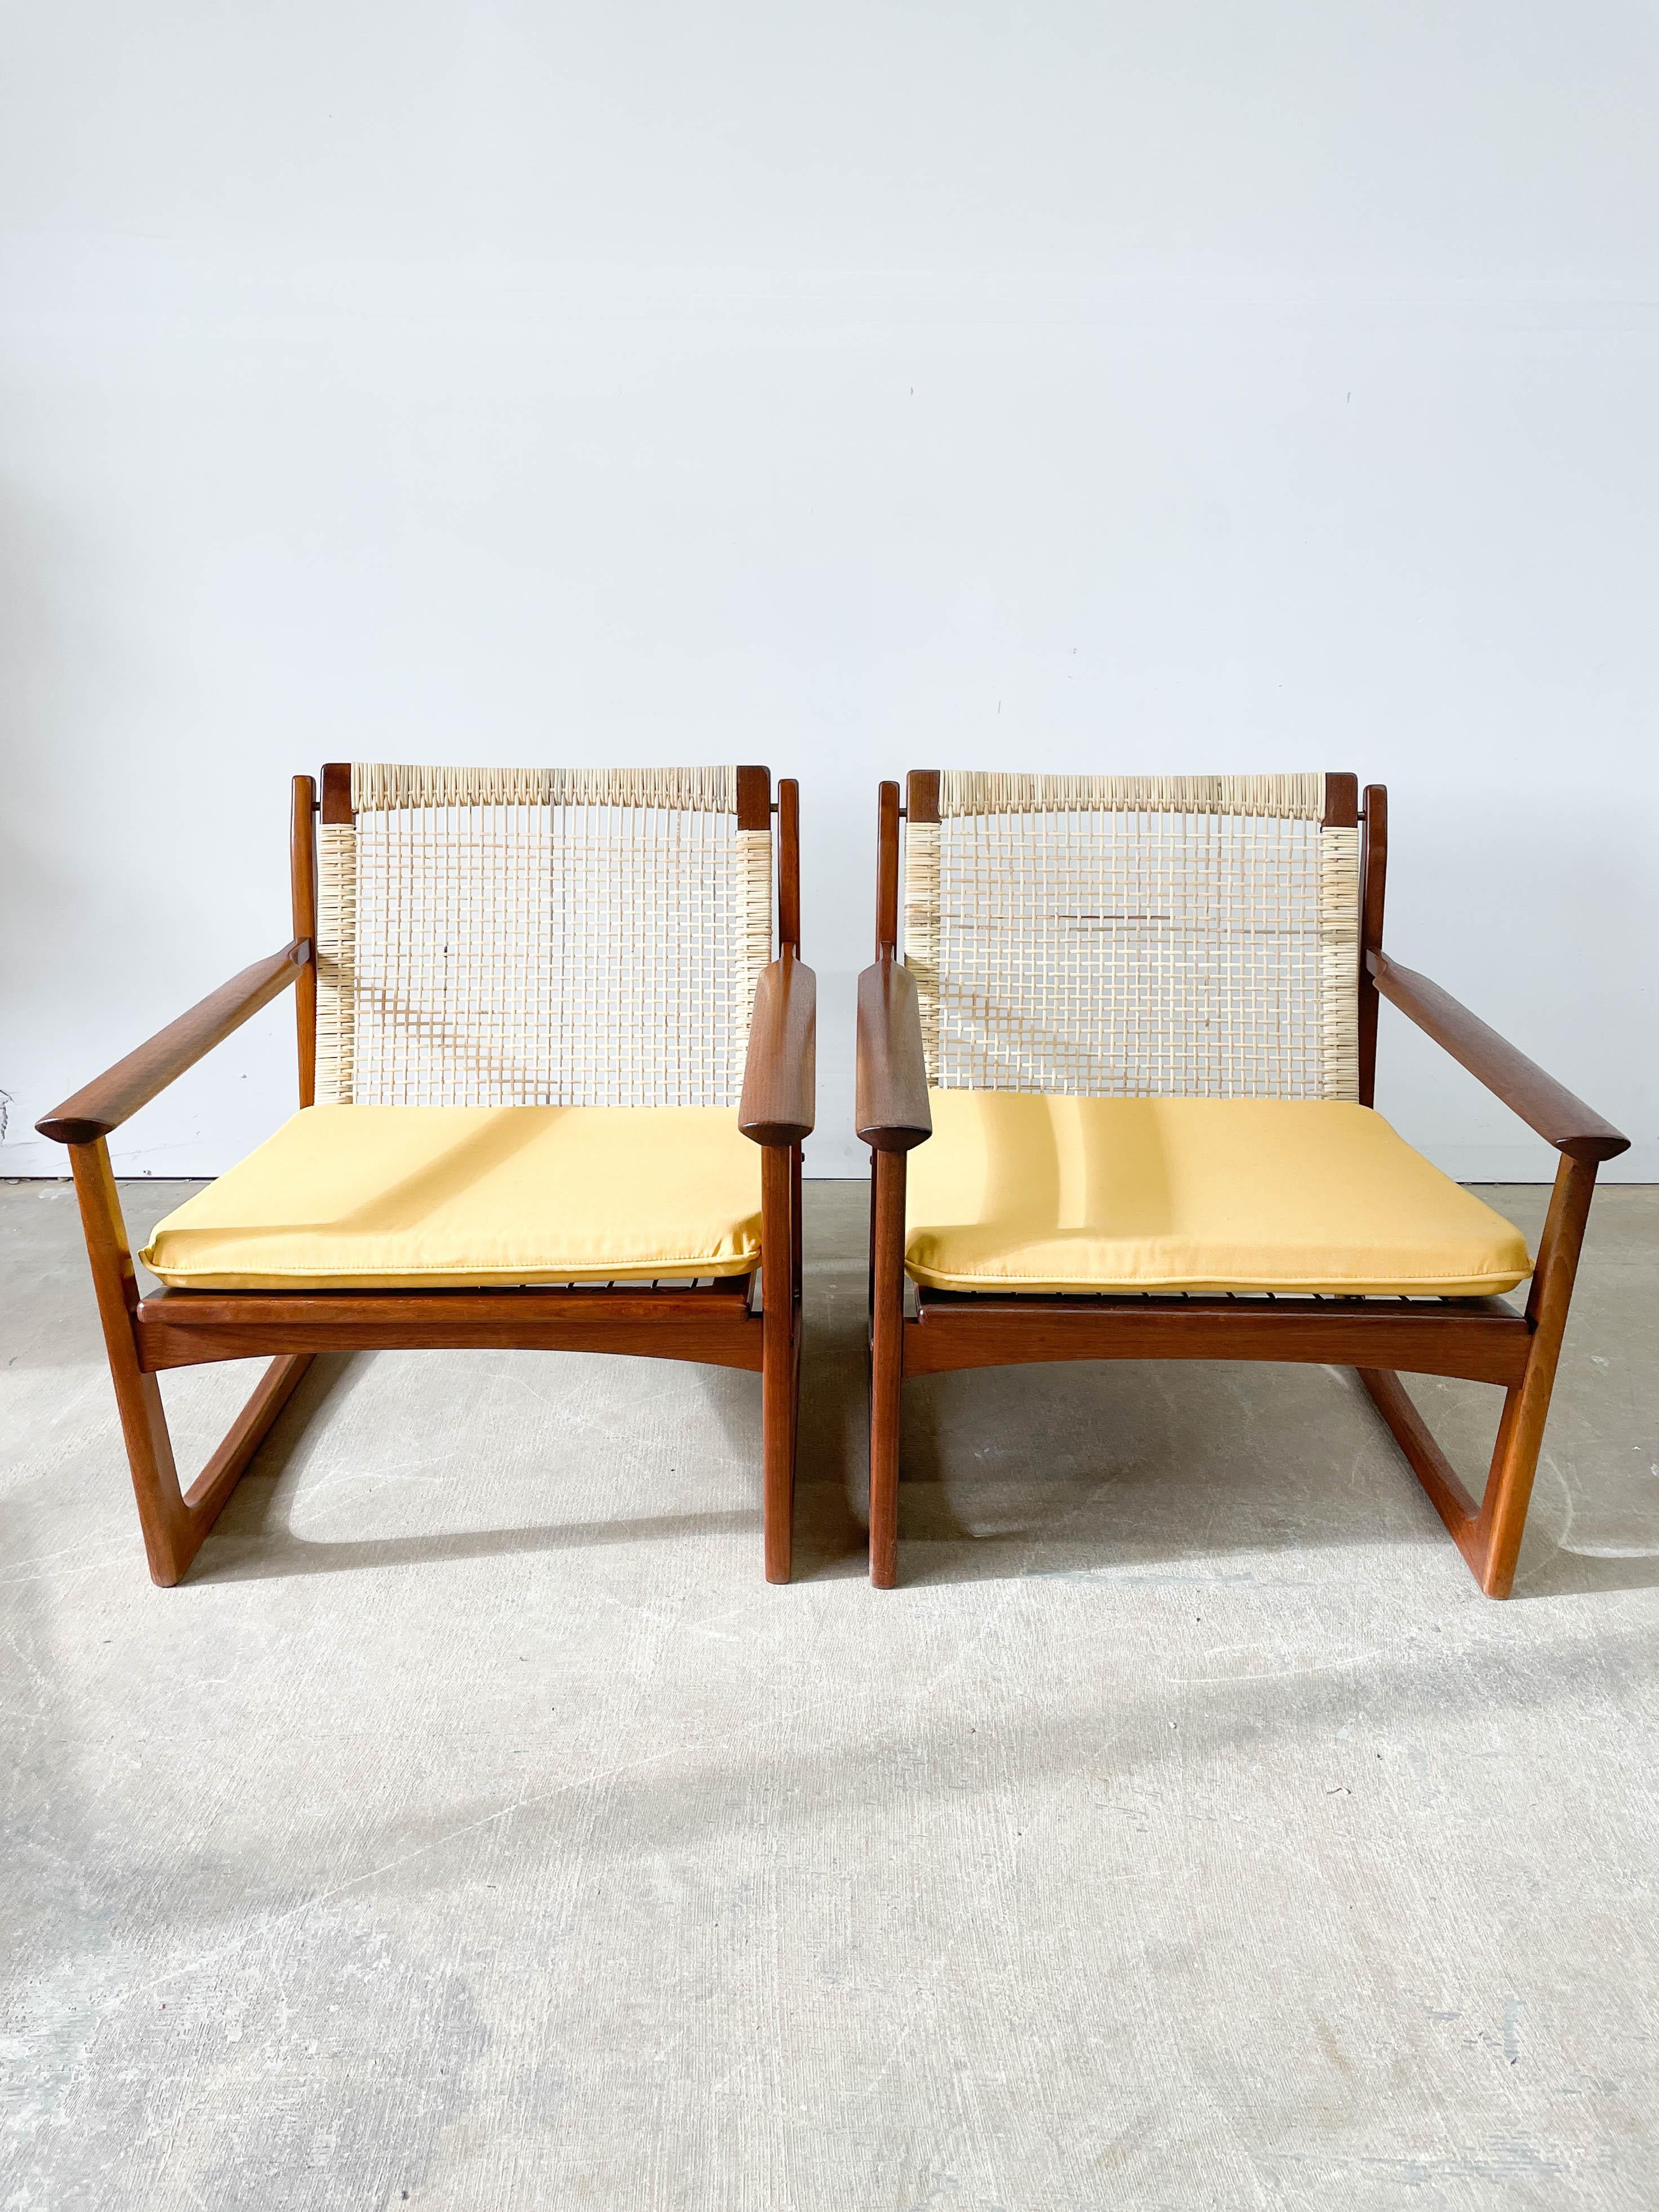 This is a superb pair of sled base lounge chairs with woven cane backs on teak frames. Designed by Hans Olsen and imported by Selig in the late 1950s, this is a fantastic example of Danish Modernism, combining craftsmanship, materials and style.